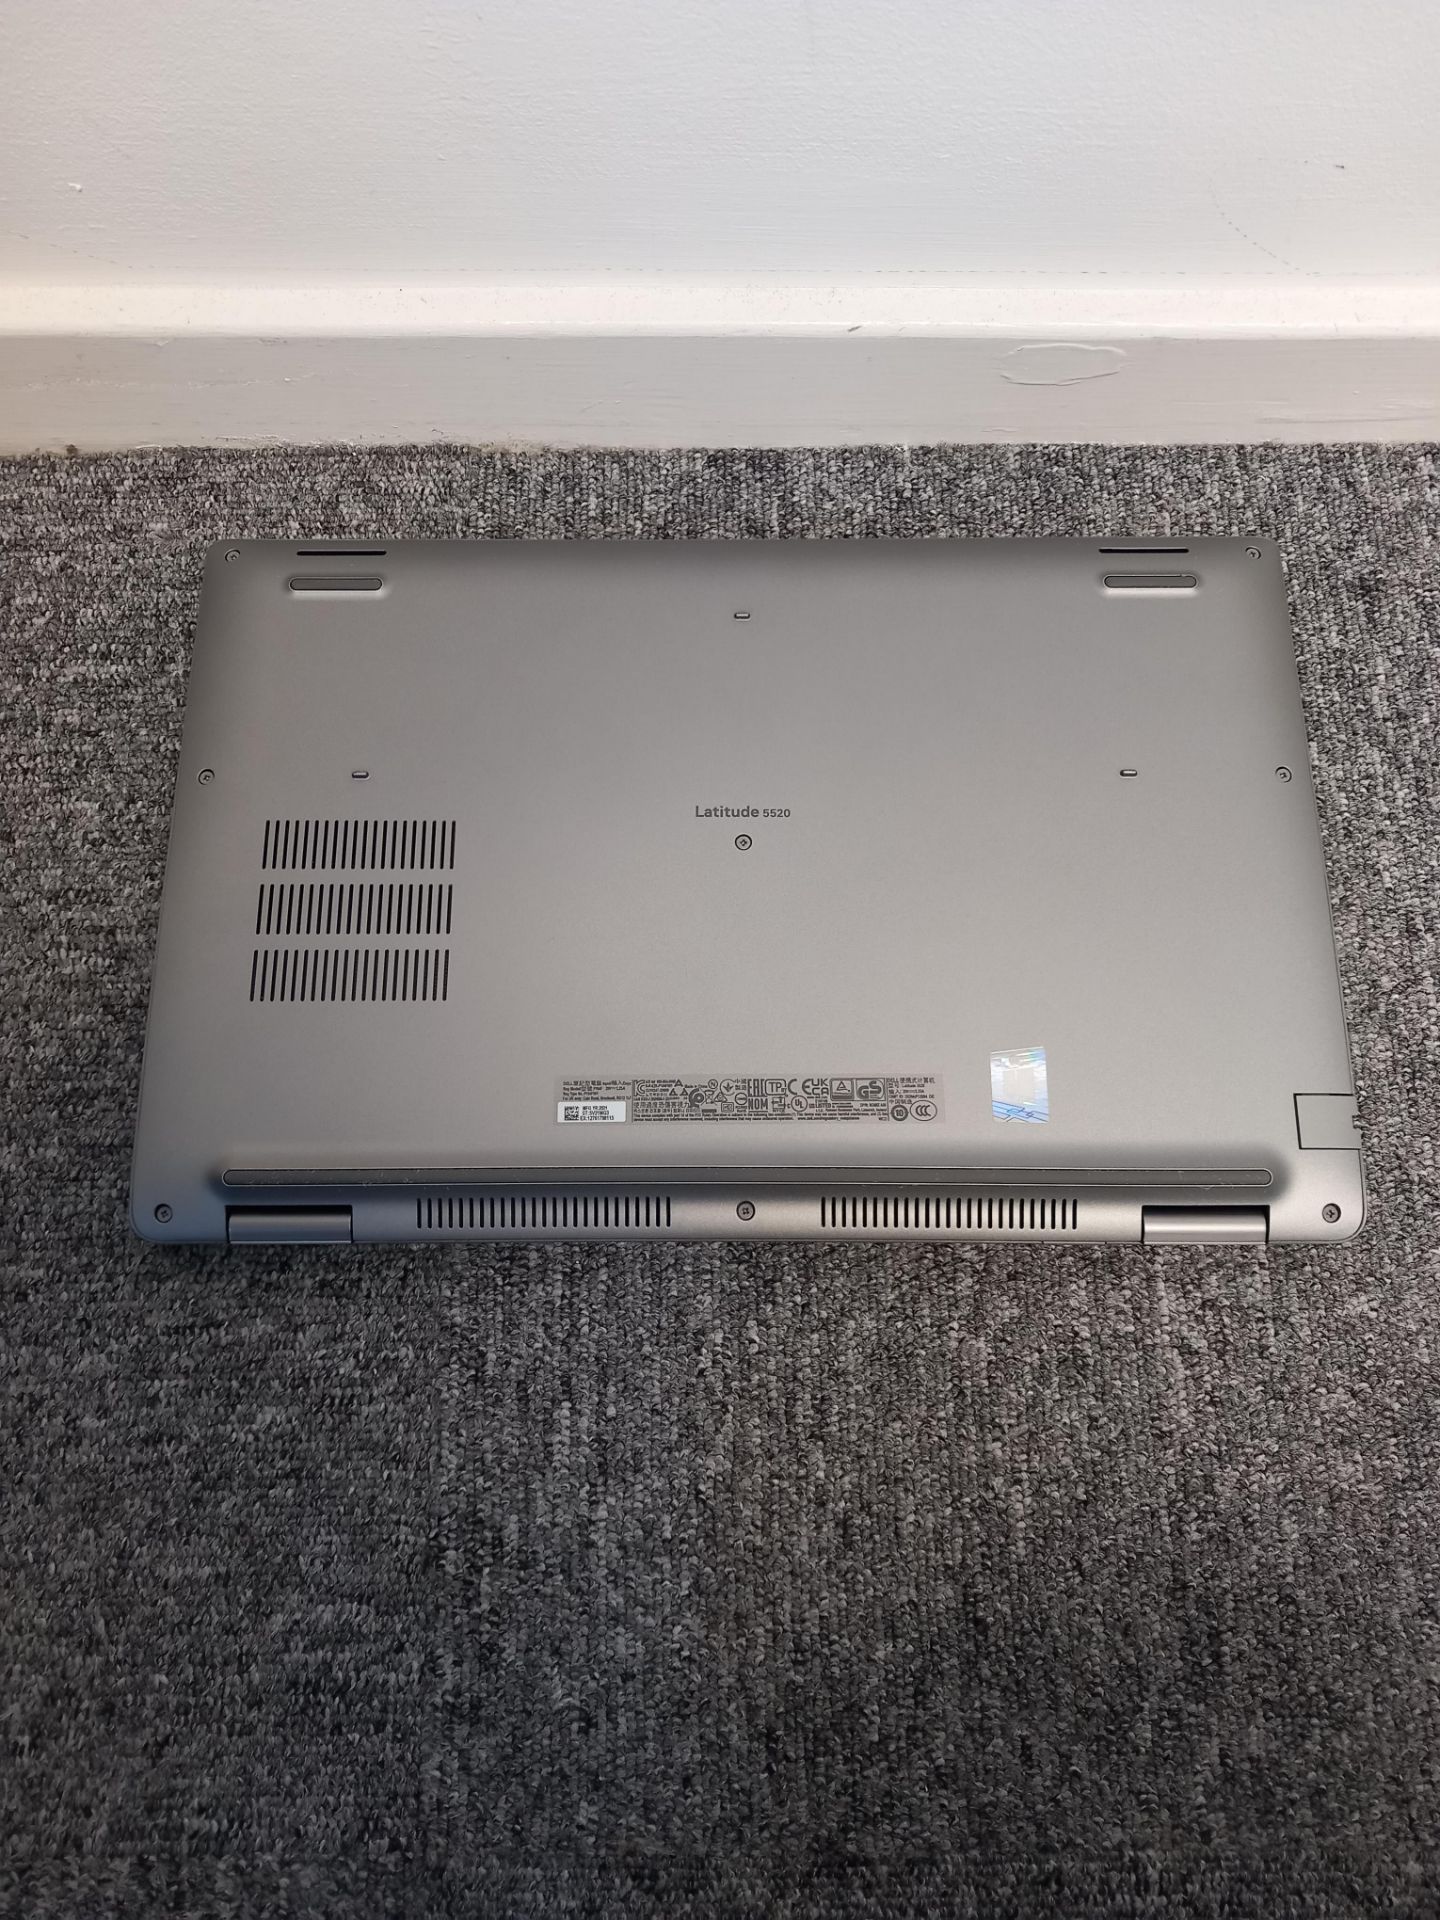 Dell Latitude 5520 Laptop with Charger (Located in Stockport) - Image 3 of 6